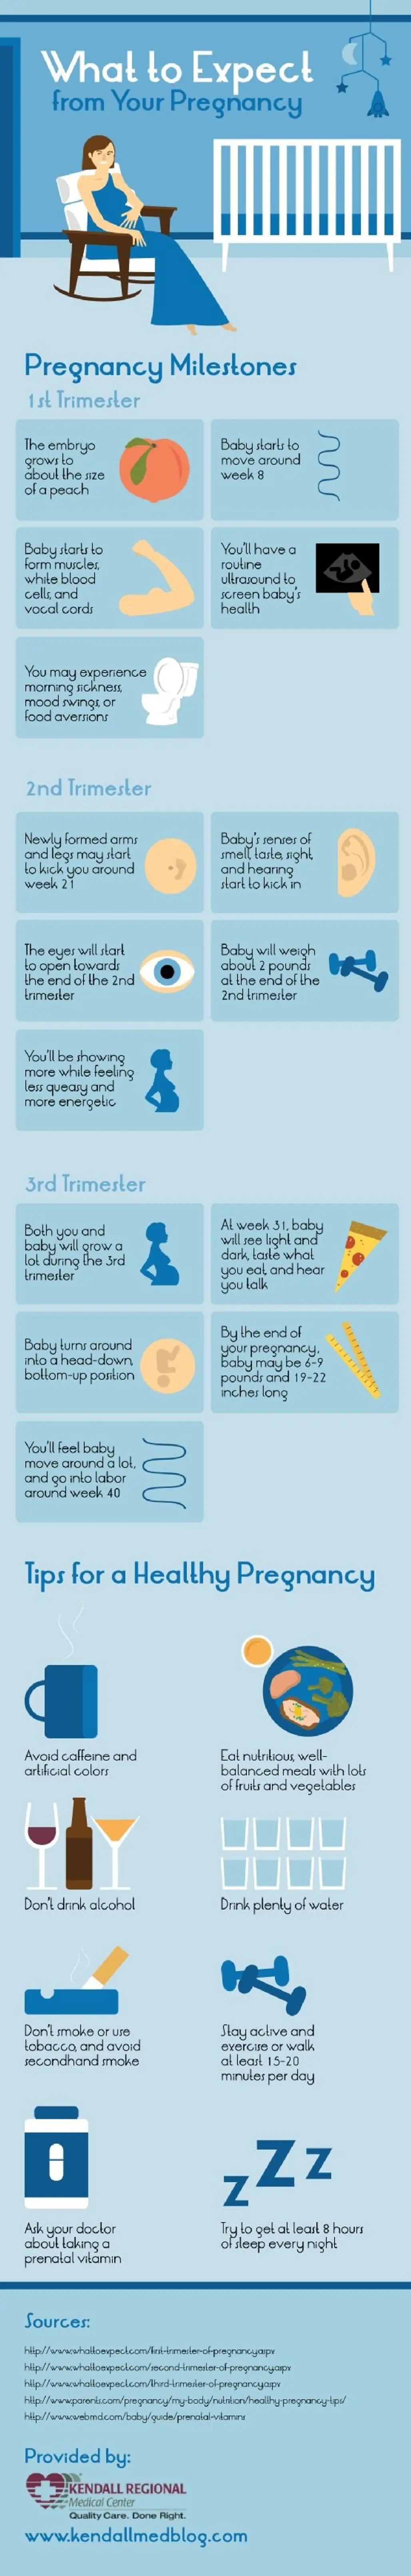 What to Expect from Your Pregnancy